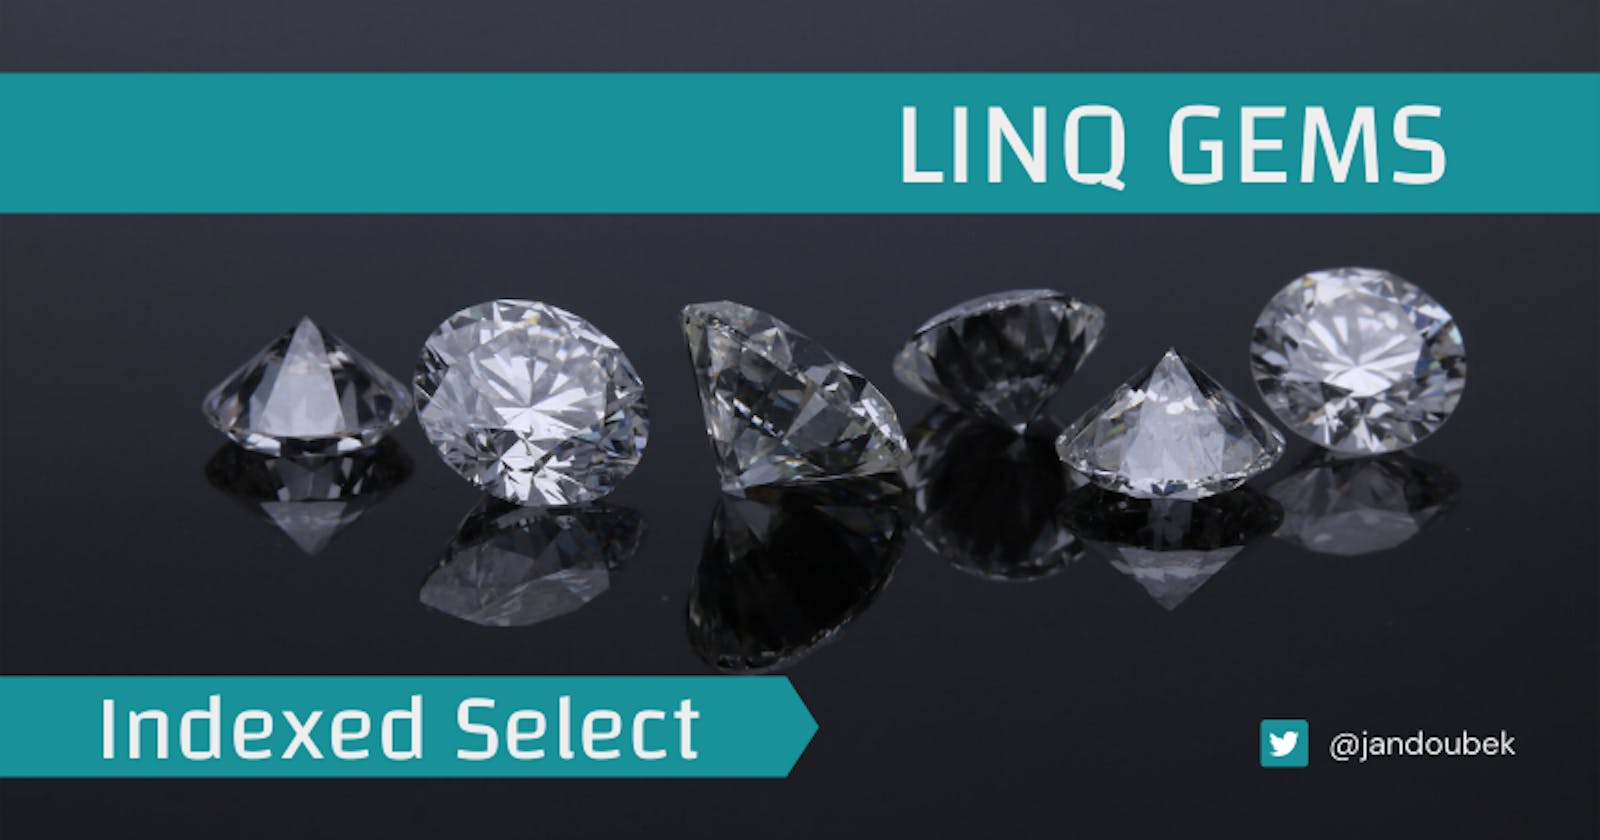 LINQ gems: Indexed Select